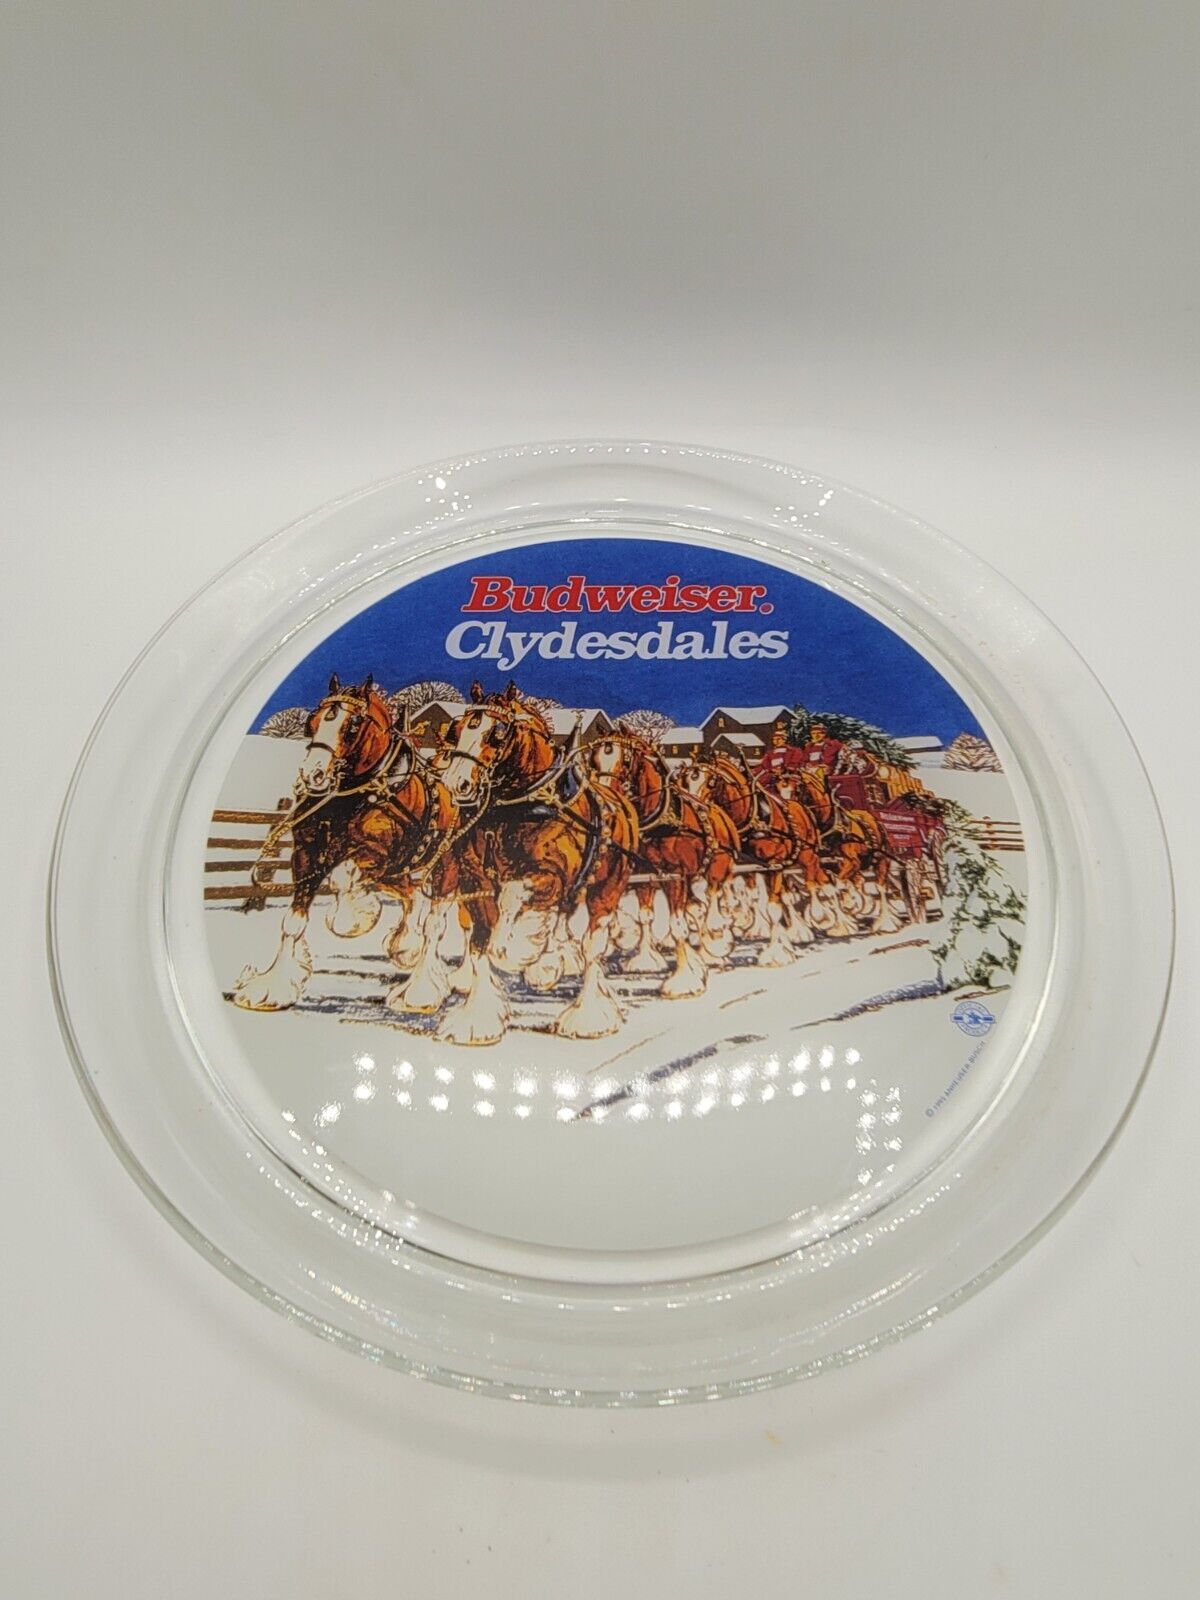 Budweiser Glass Serving Tray Clydesdales 1995 Anheuser Busch Winter Holiday